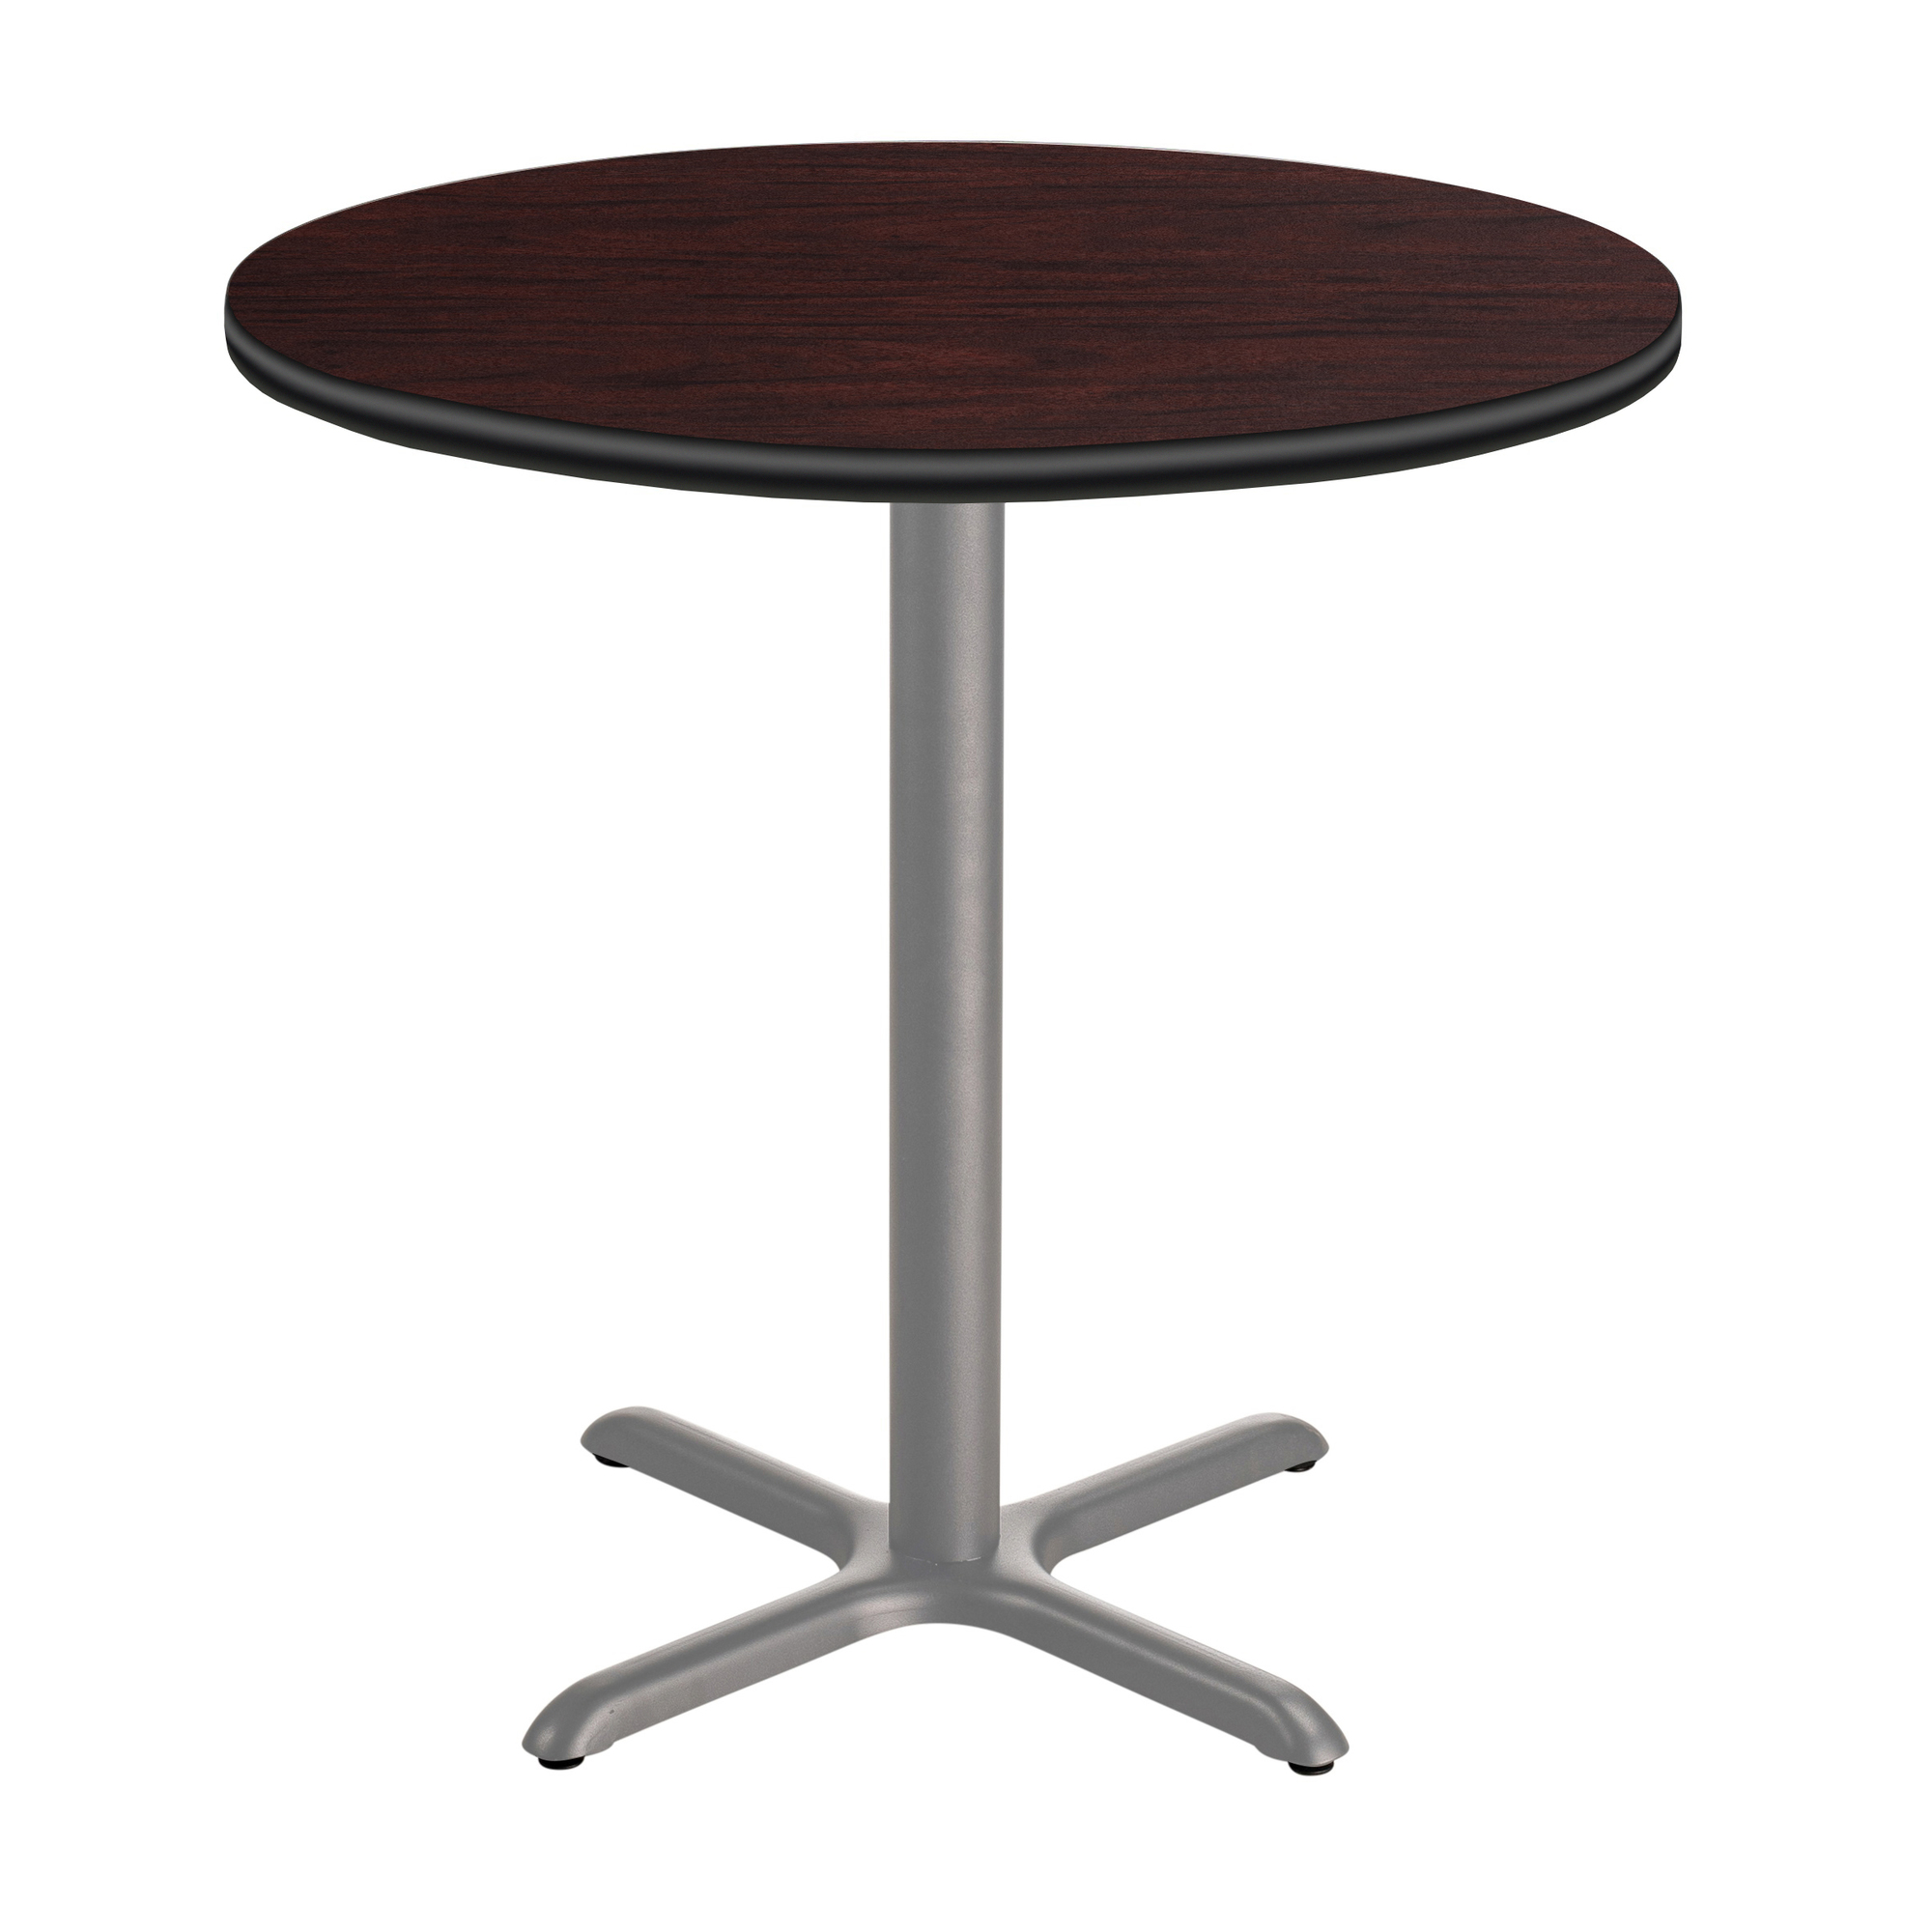 "National Public Seating, Cafe Table, 36x36x42 Round ""X"" Base, Height 42 in, Model CTG13636XBPBTMMY"